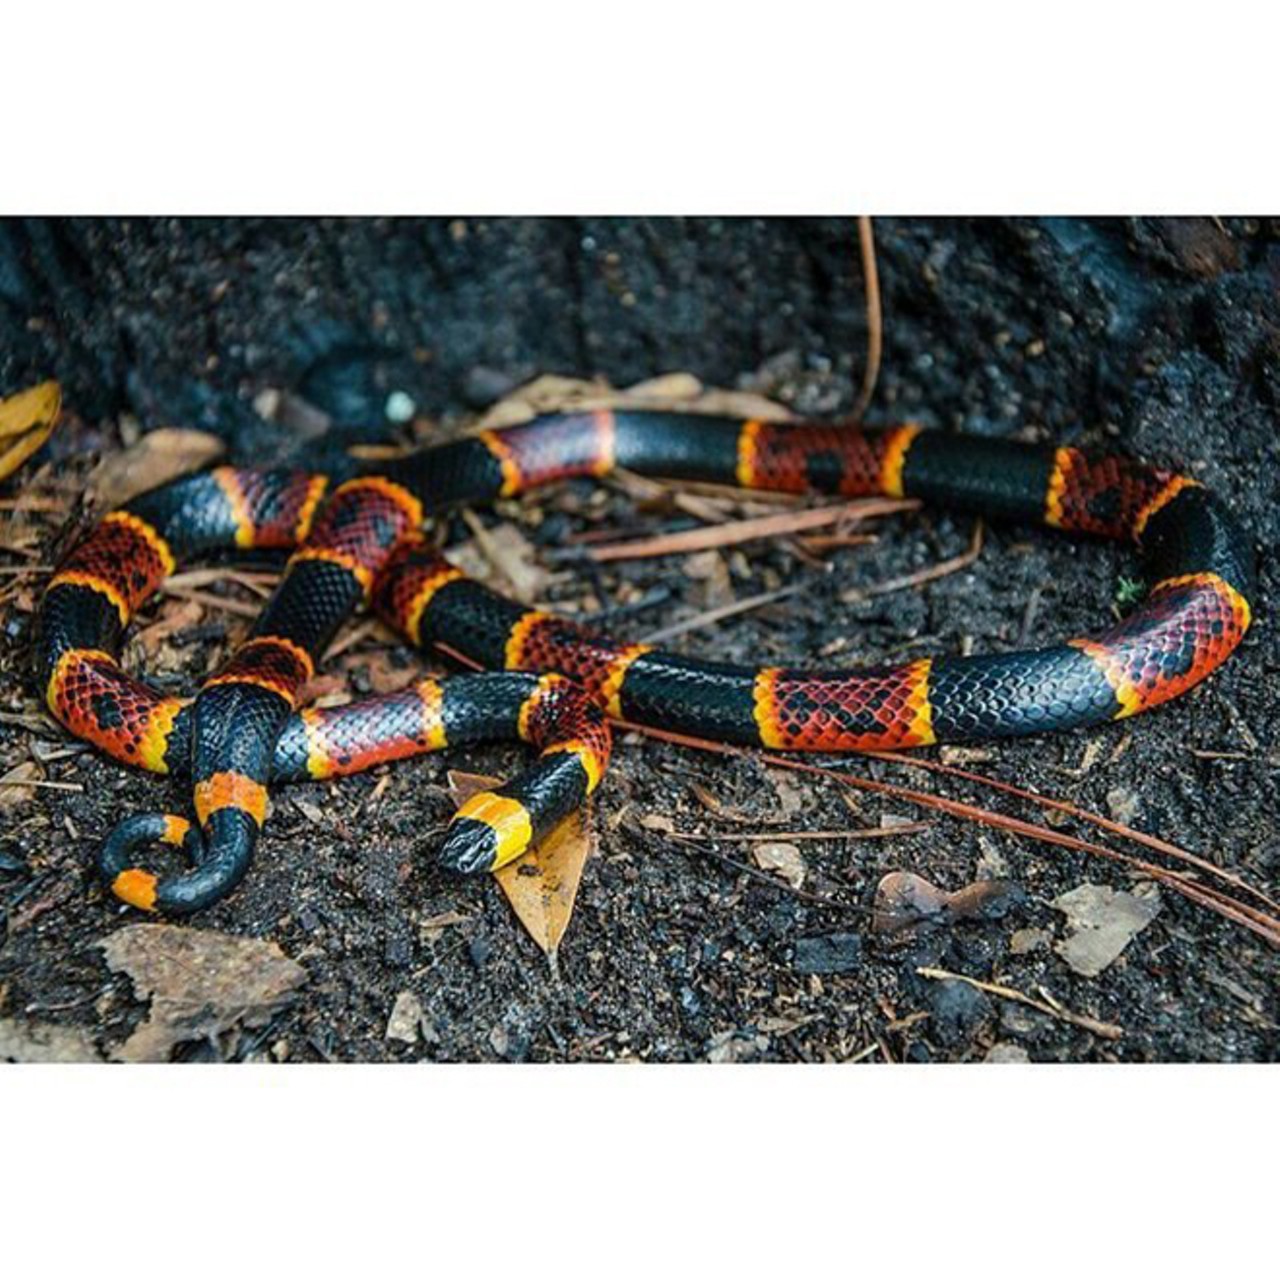 You could be get bit by an Eastern coral snake, or one of the many poisonous snakes that call Florida home.
Photo via Instagram user herpjesus